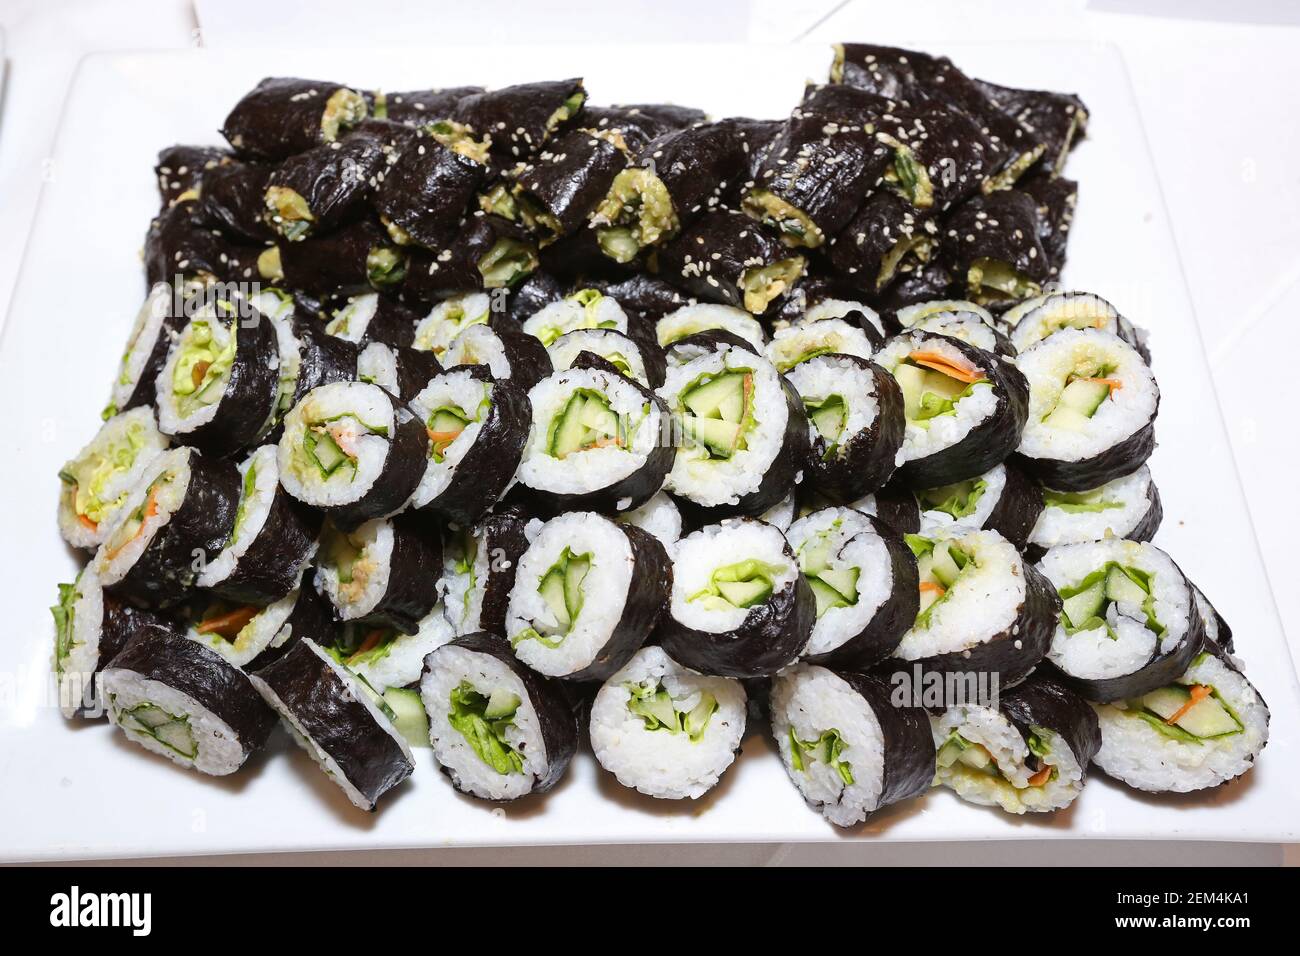 Prepared sushi served as a canape Stock Photo